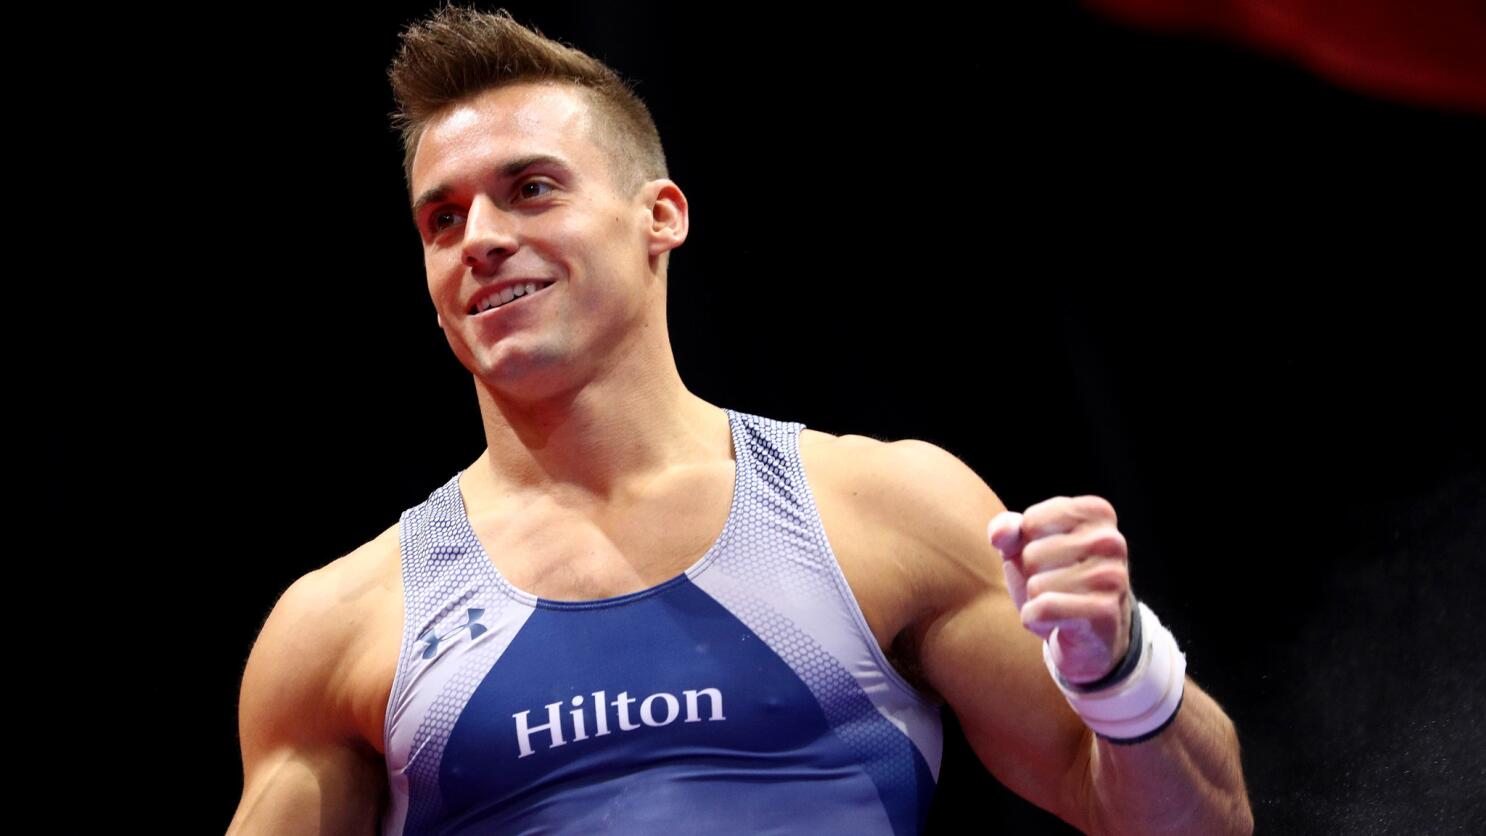 Sam Mikulak Qualifies for His Third Olympic Games - The New York Times